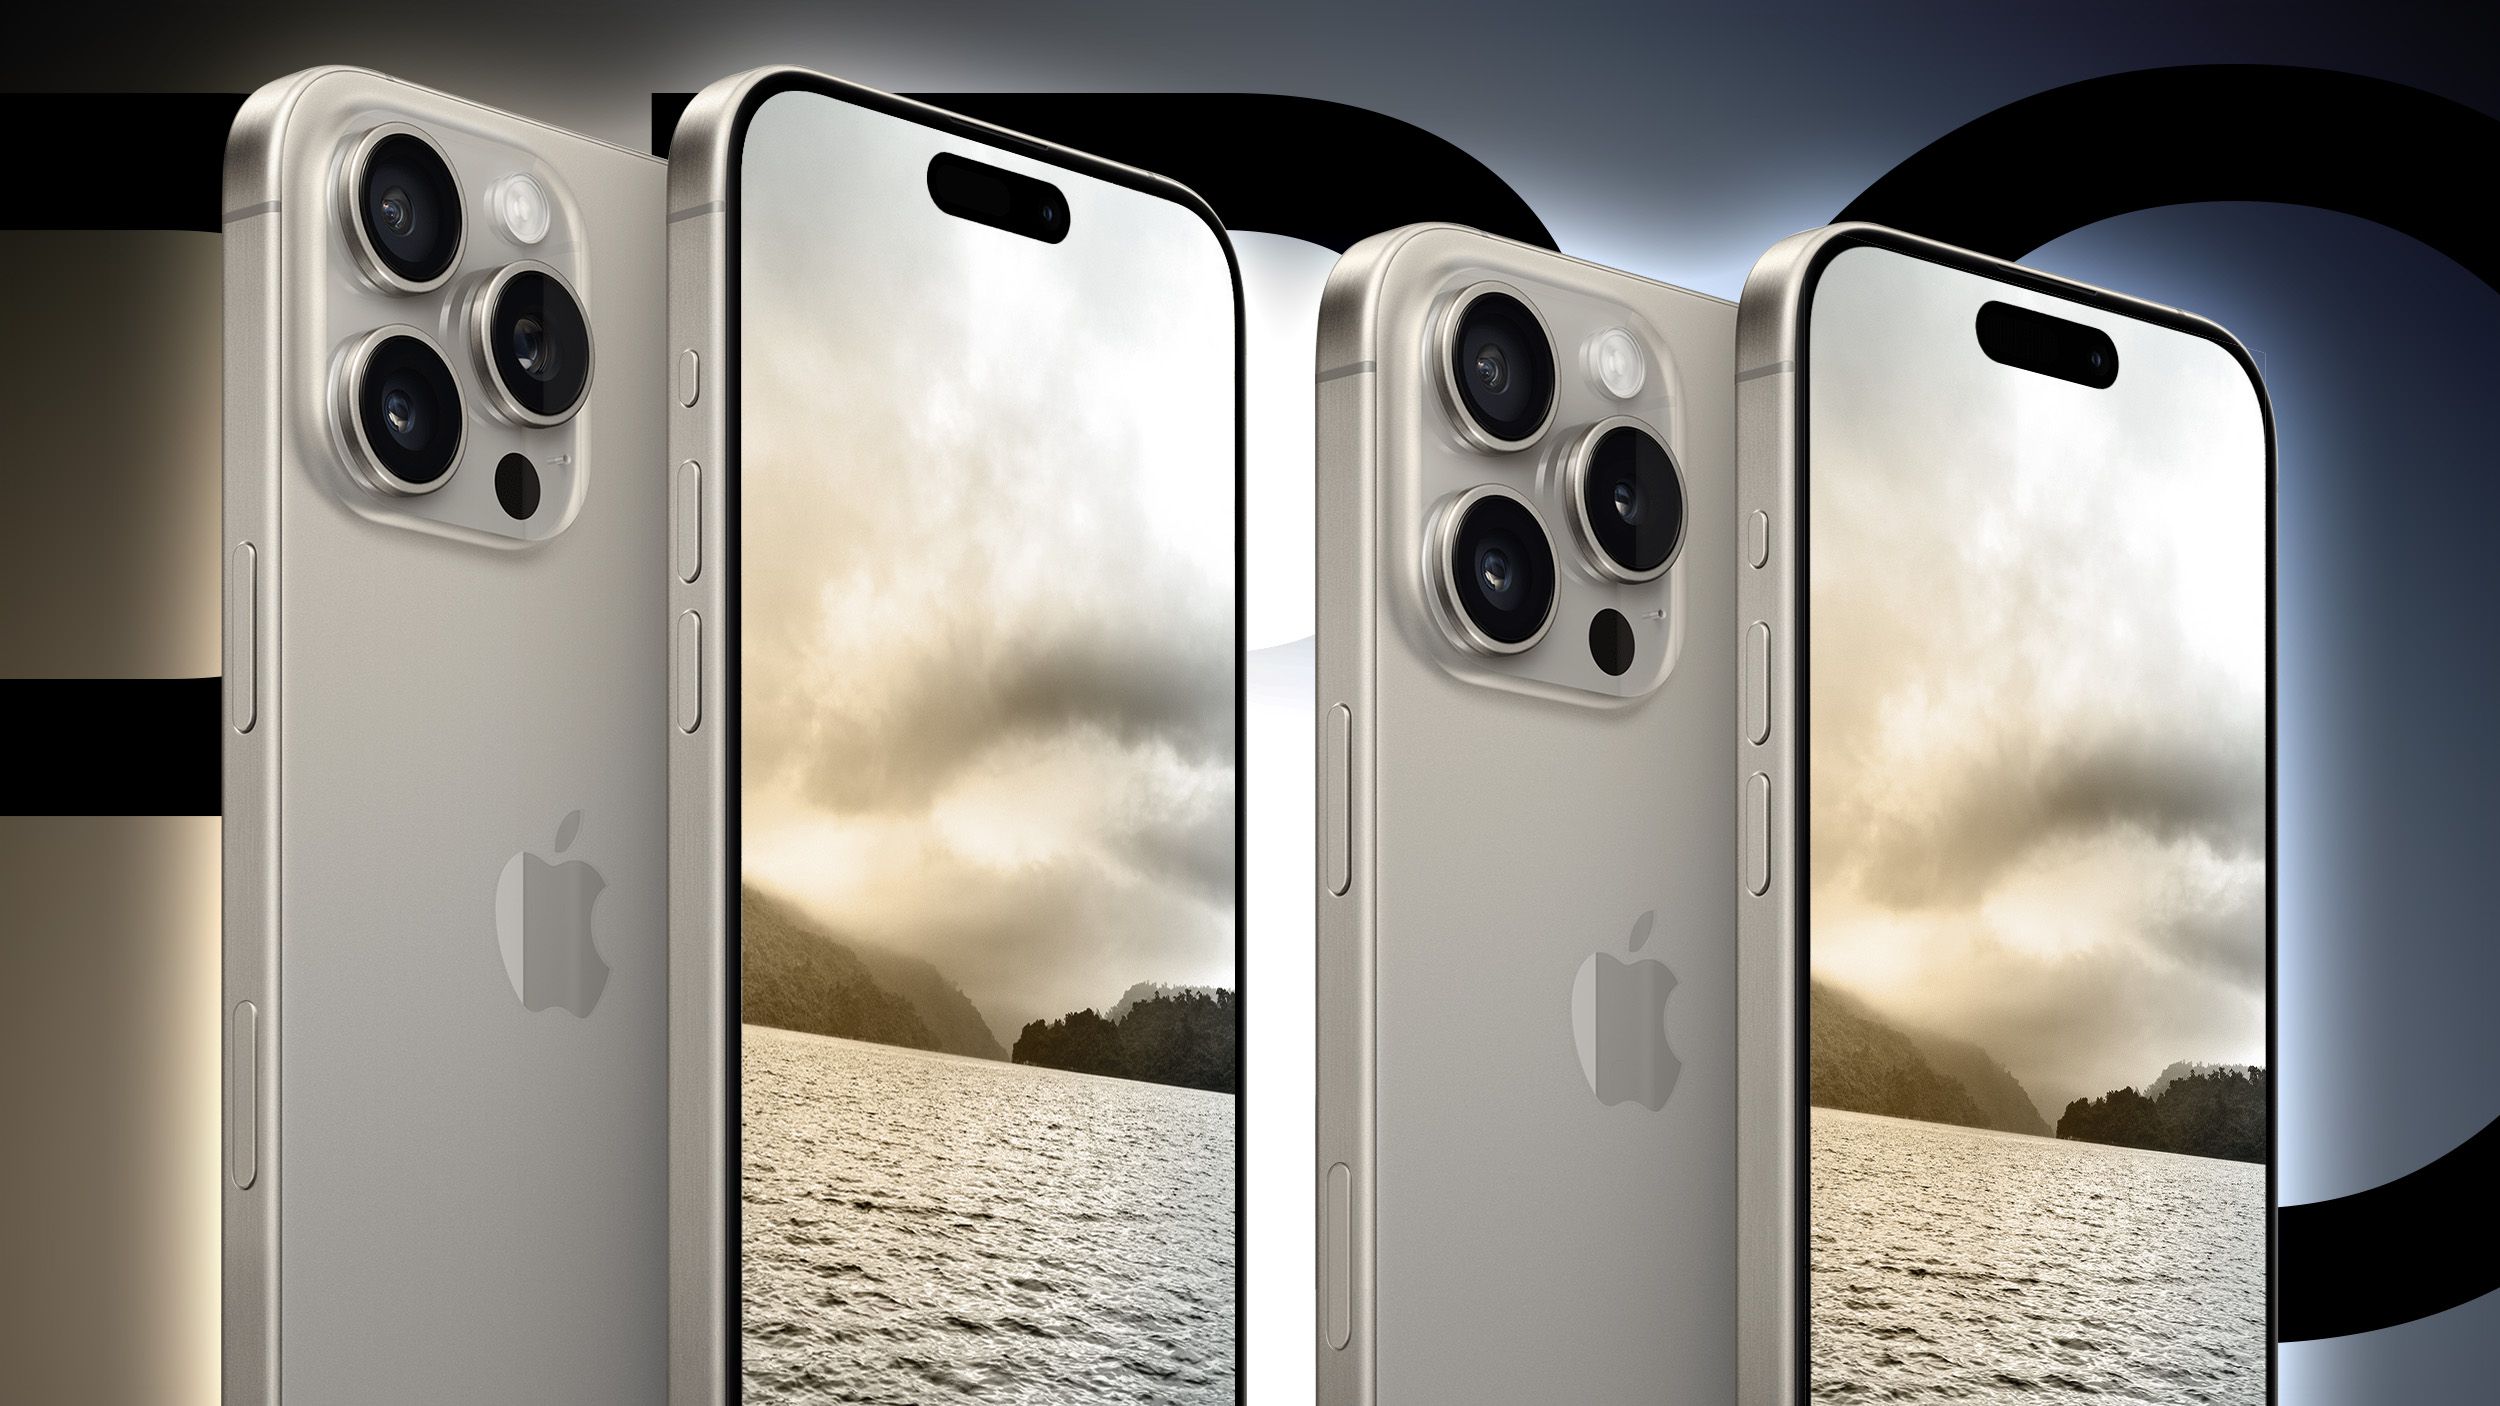 Here’s what the iPhone 16 Pro and iPhone 16 Pro Max will look like